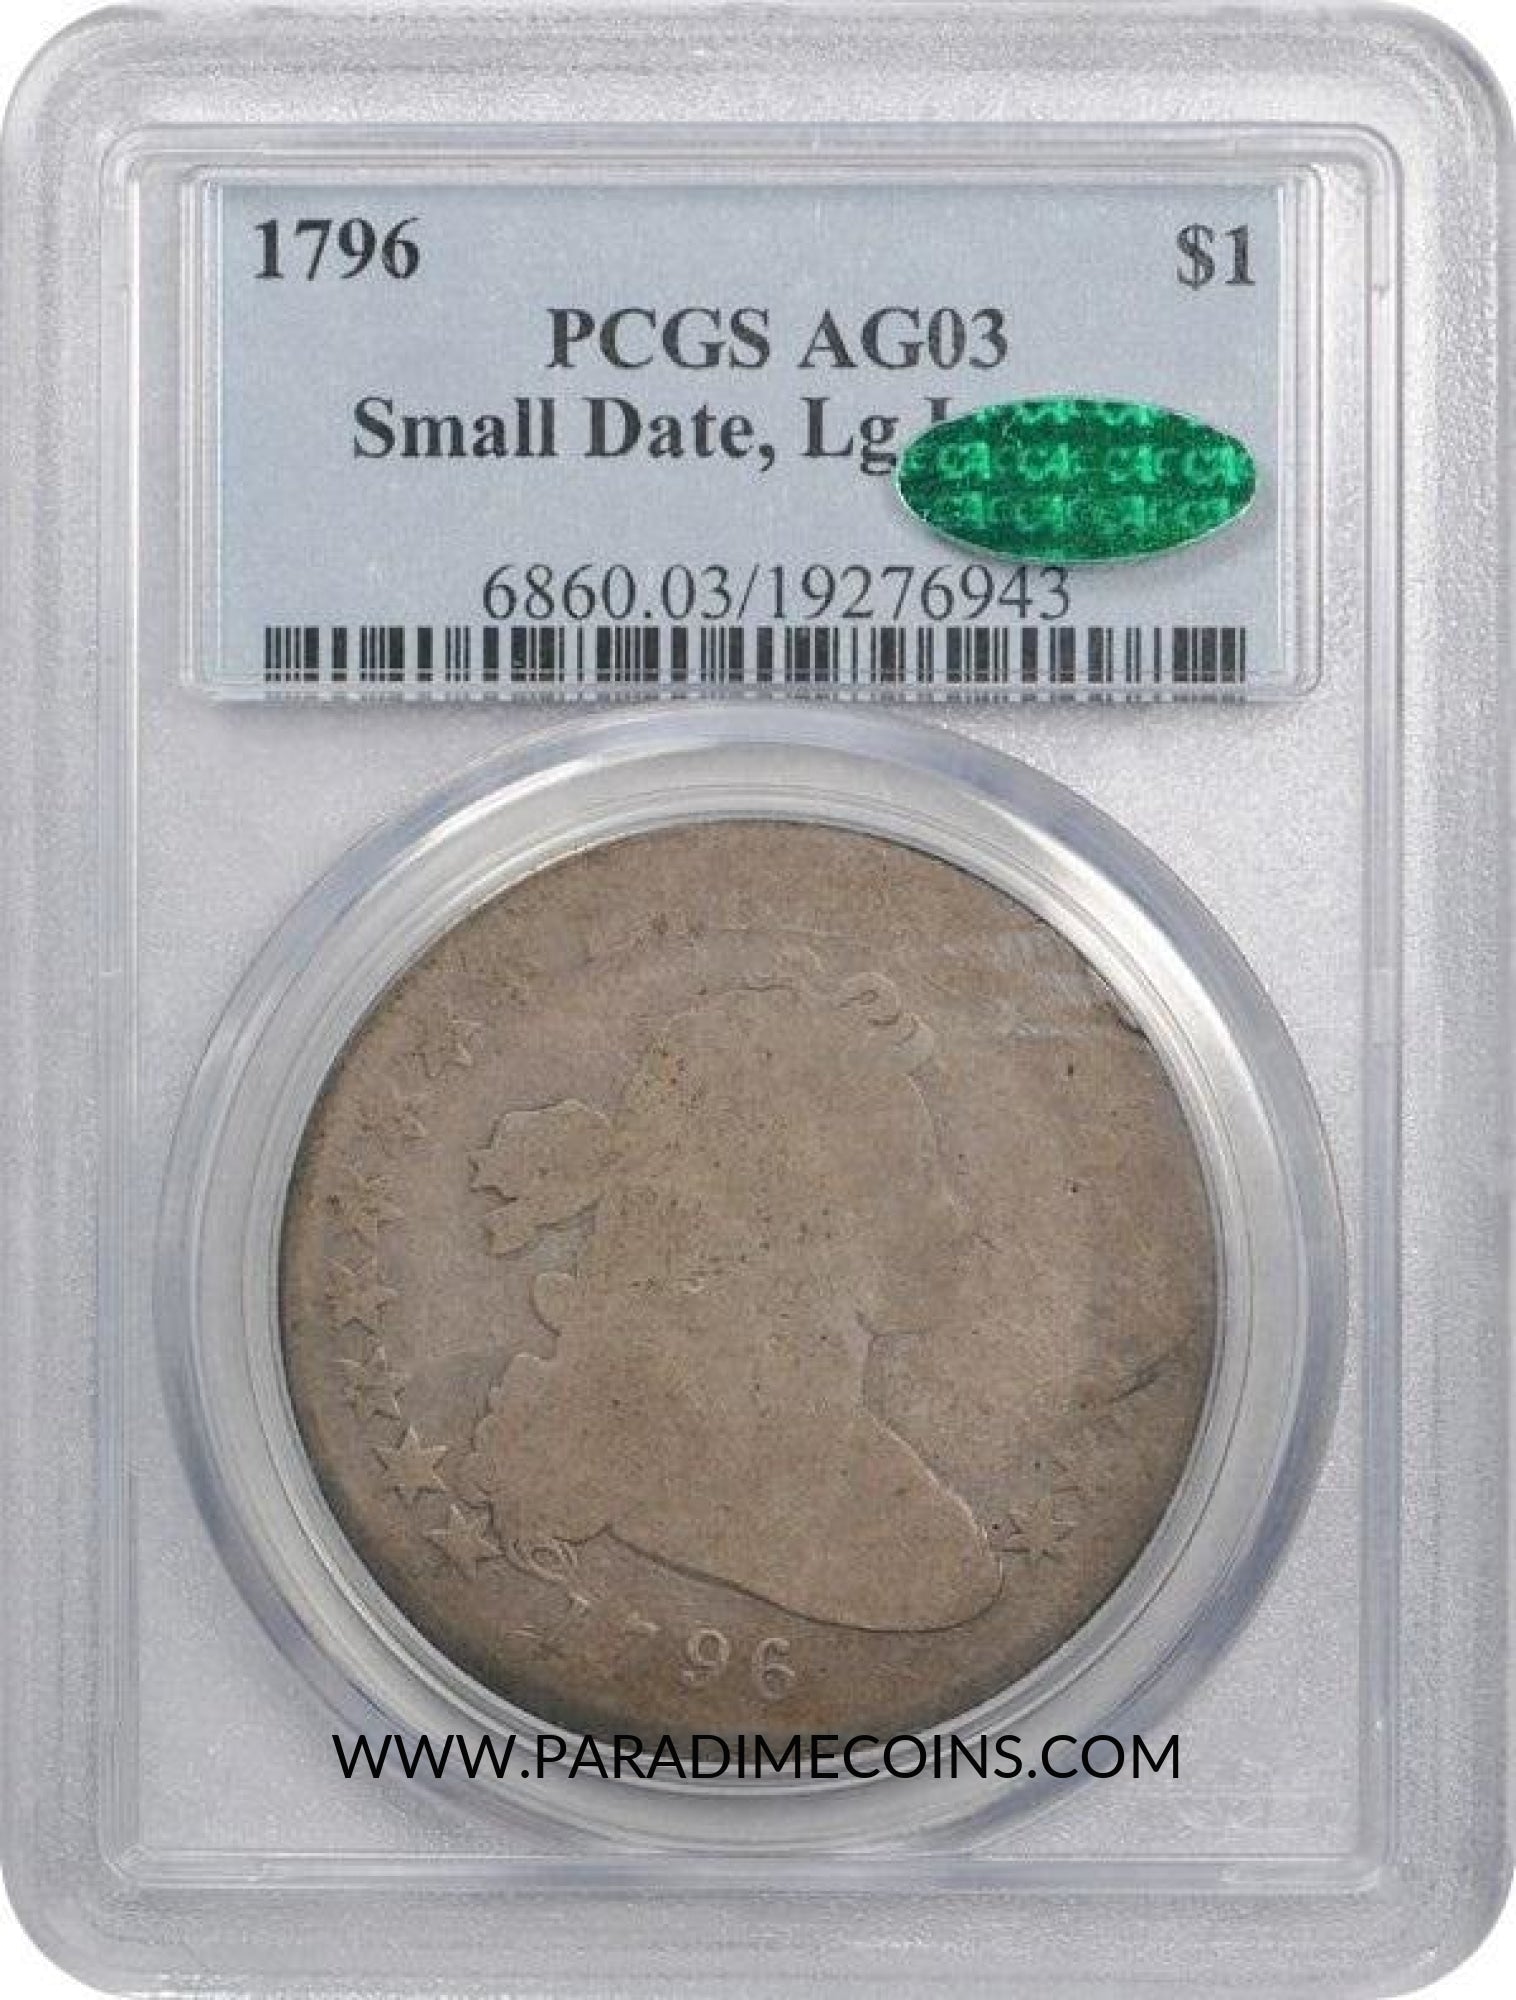 1796 $1 Sm Date Lg Letters AG03 PCGS CAC - Paradime Coins | PCGS NGC CACG CAC Rare US Numismatic Coins For Sale